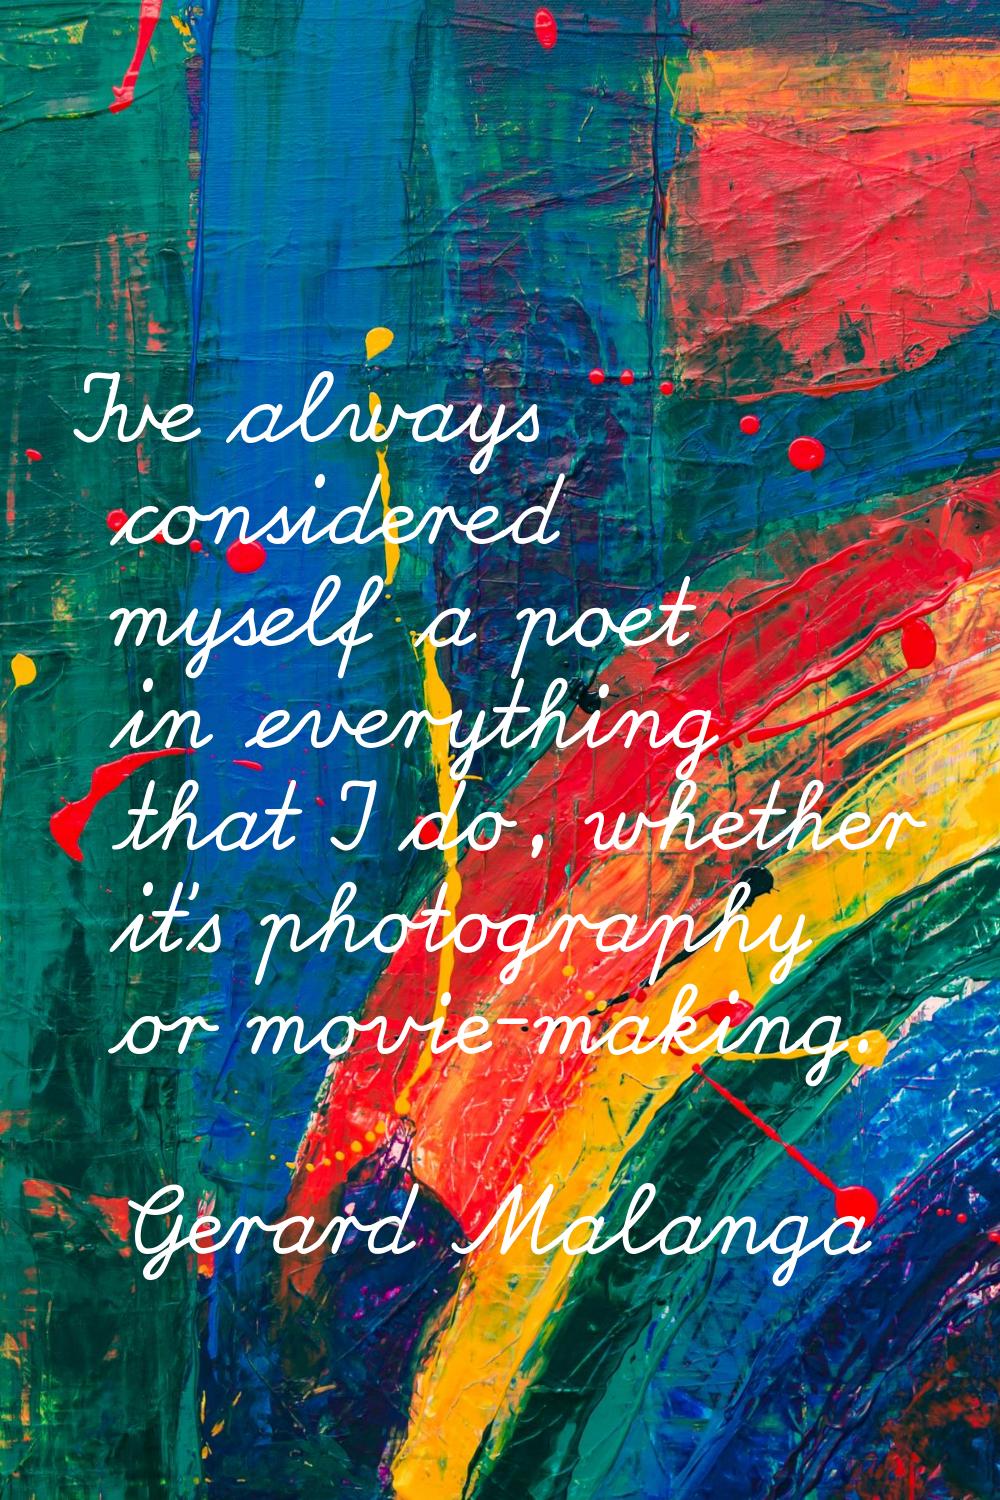 I've always considered myself a poet in everything that I do, whether it's photography or movie-mak